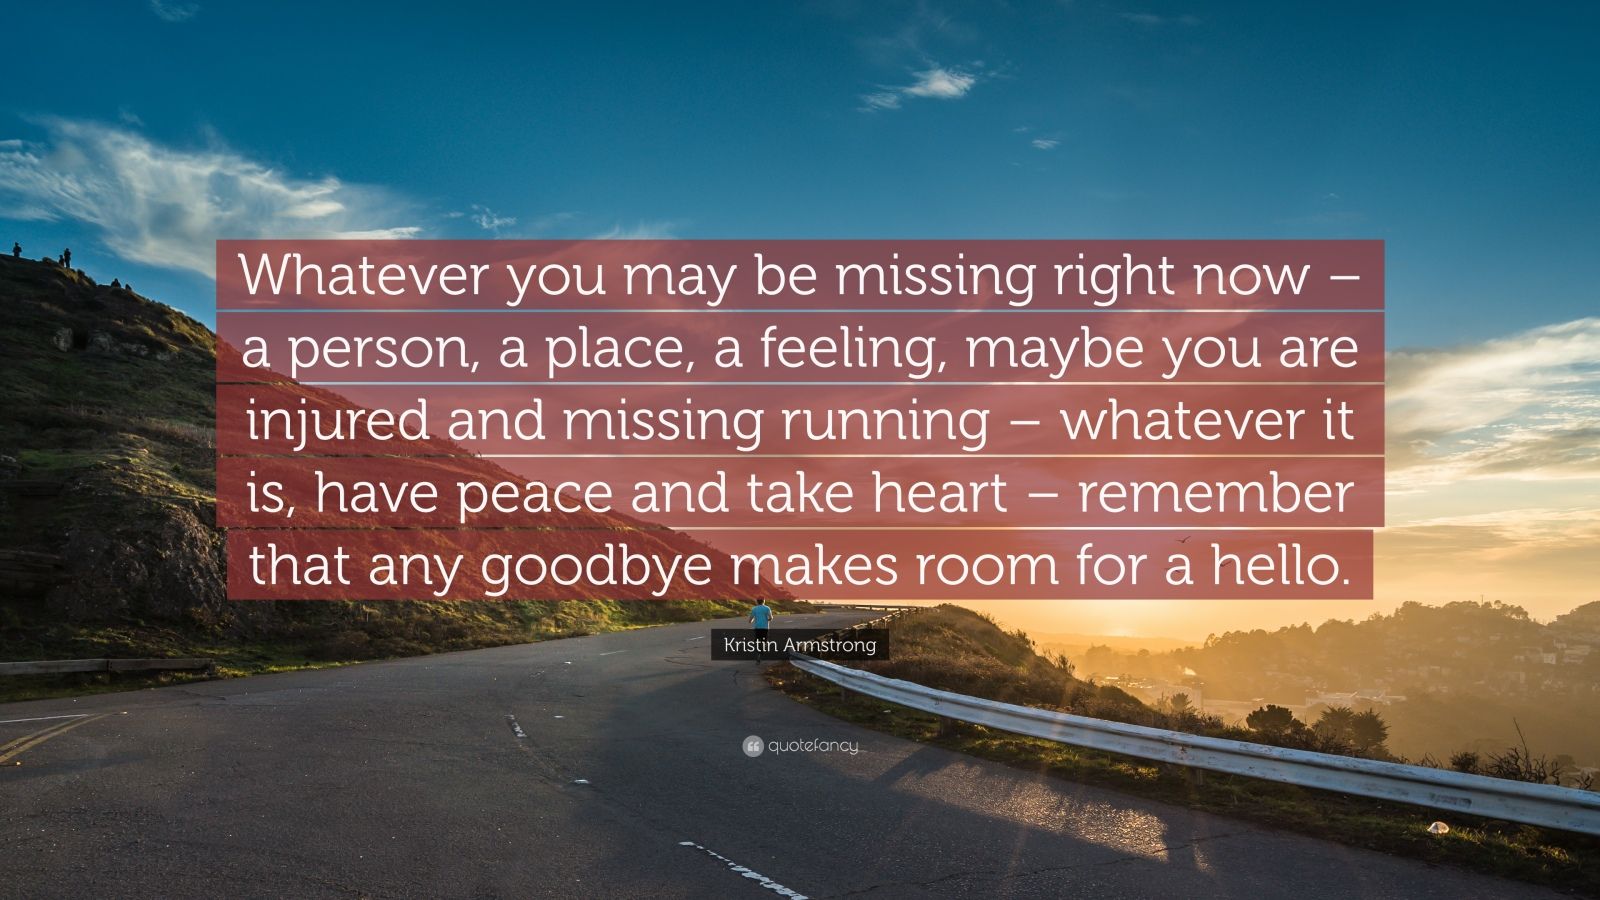 Kristin Armstrong Quote: “Whatever you may be missing right now – a person, a ...1600 x 900